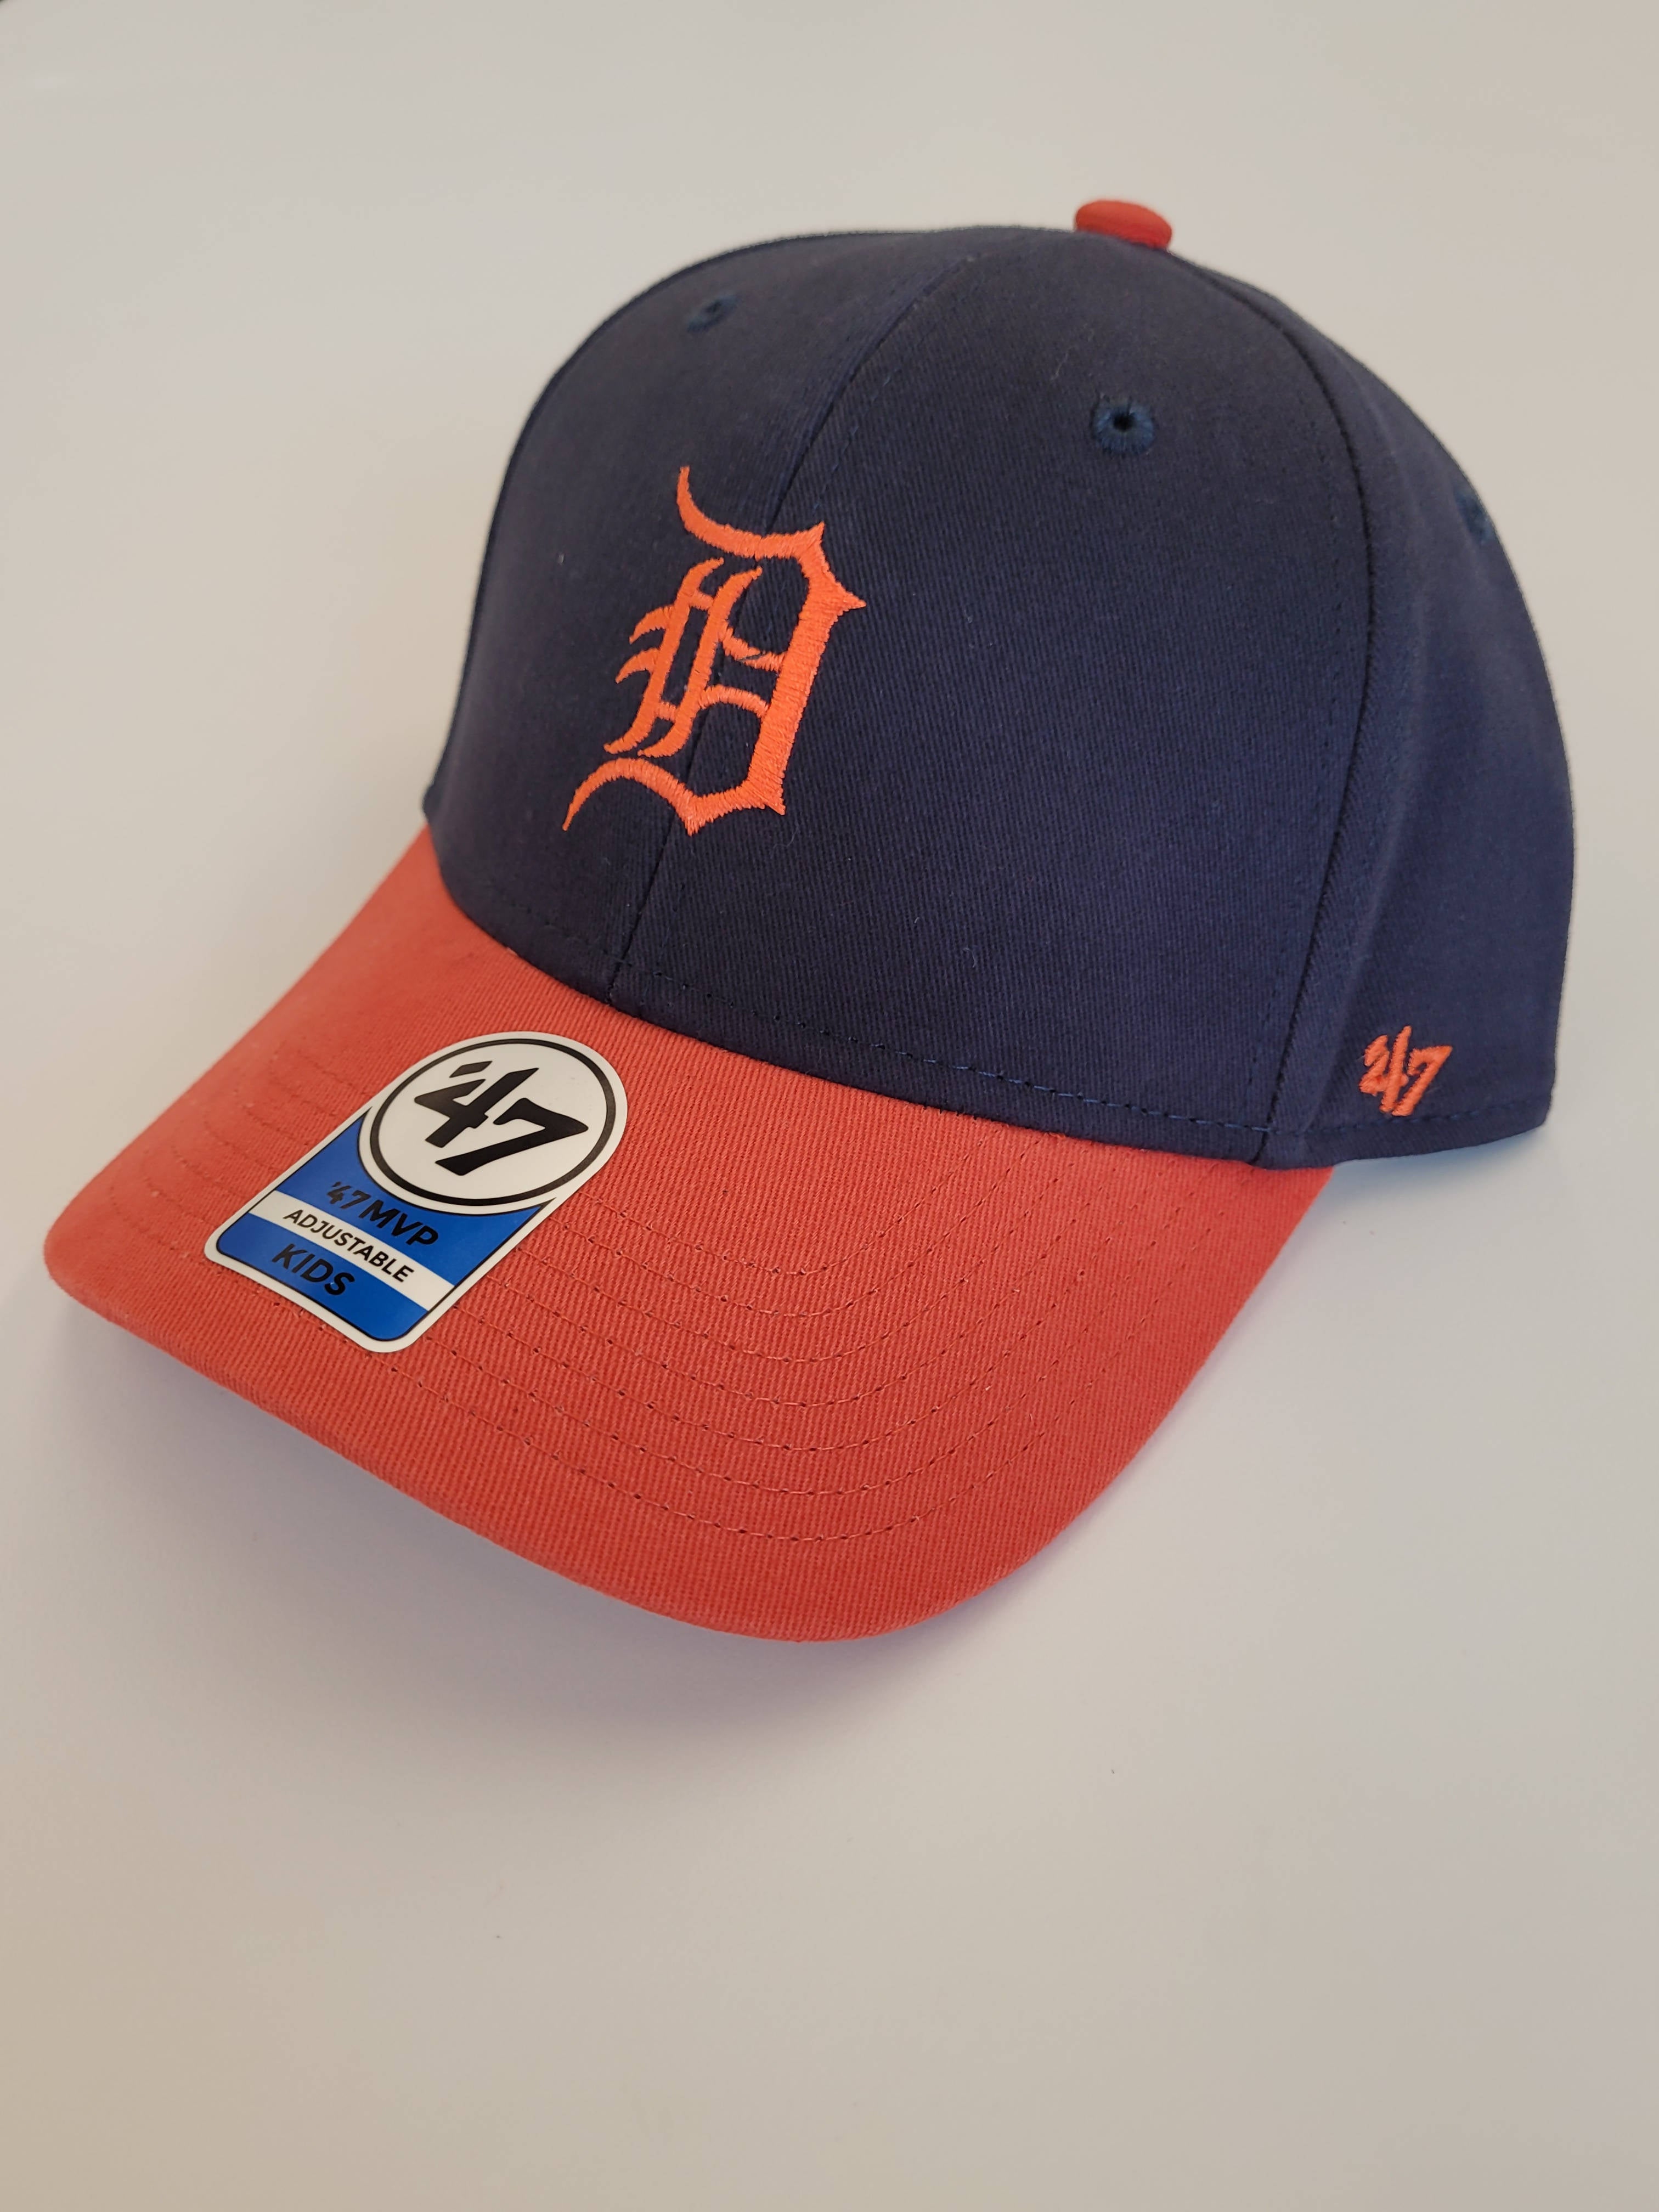 Kids Short Stack 47 MVP Tigers Hat – All Things Marketplace